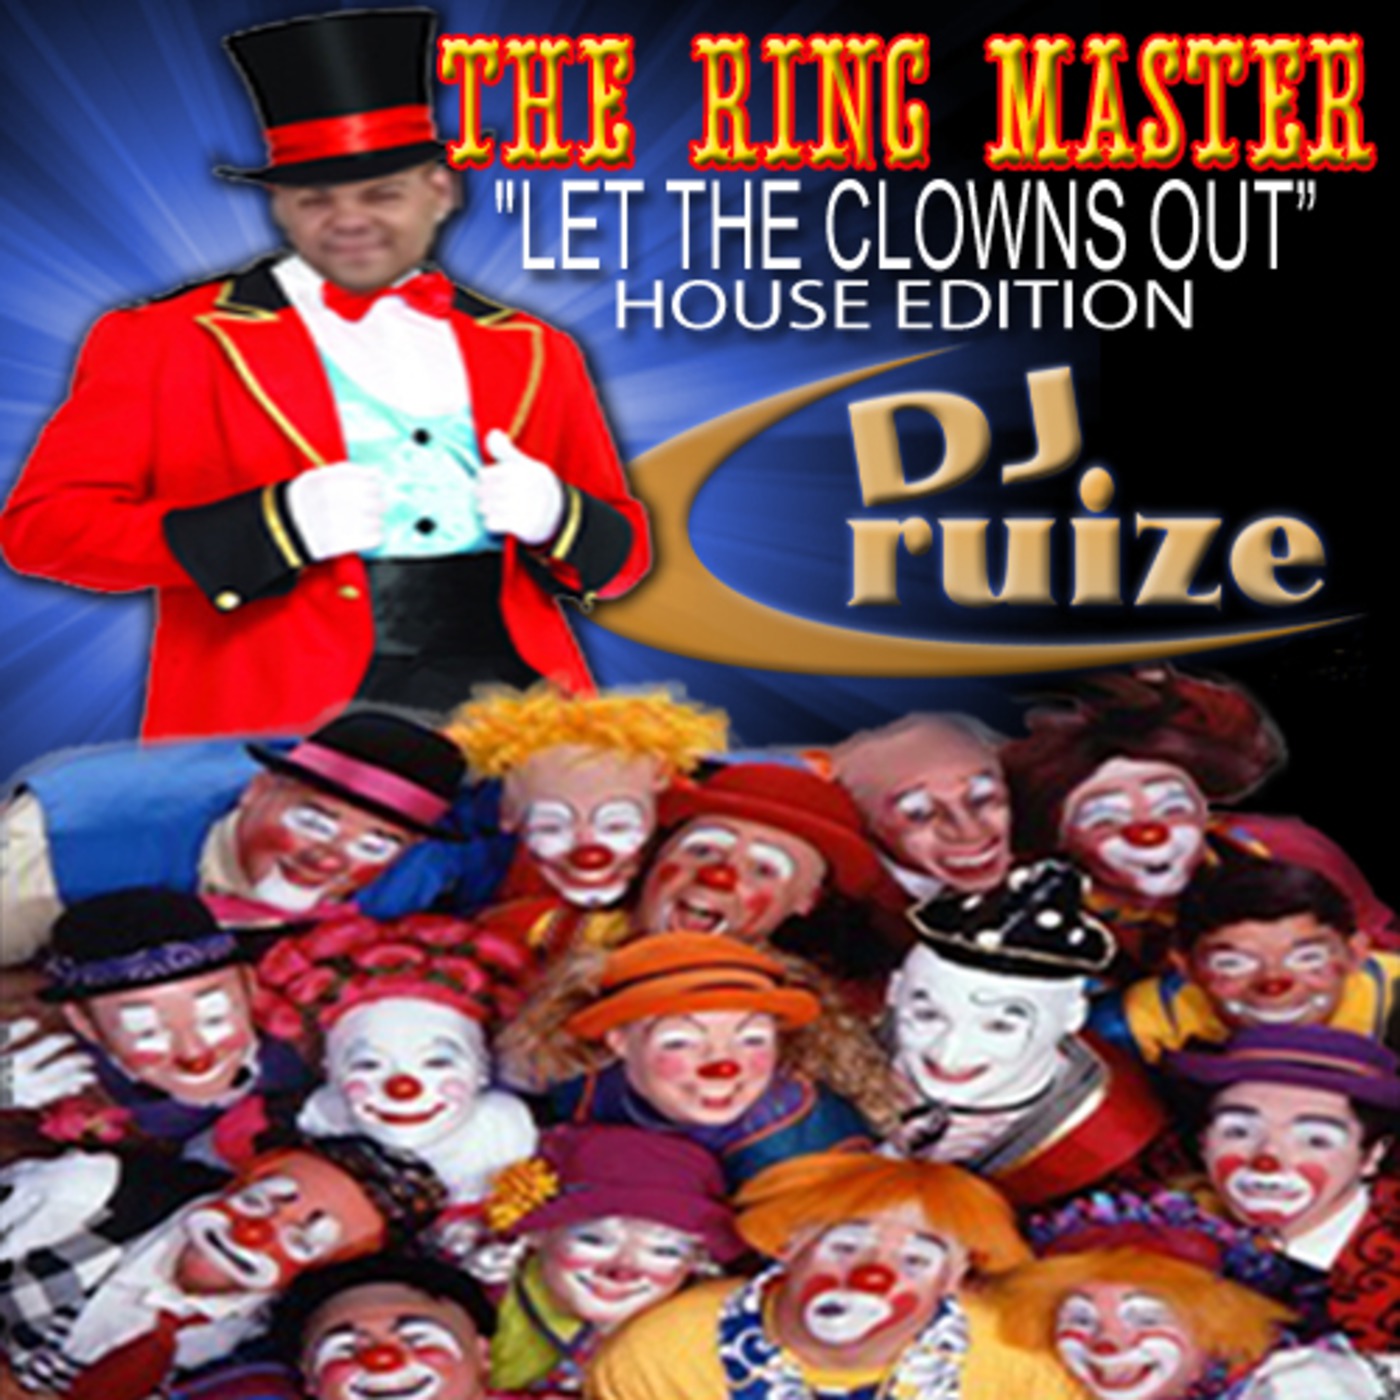 The Ring Master ”Let The Clowns Out” House Edition